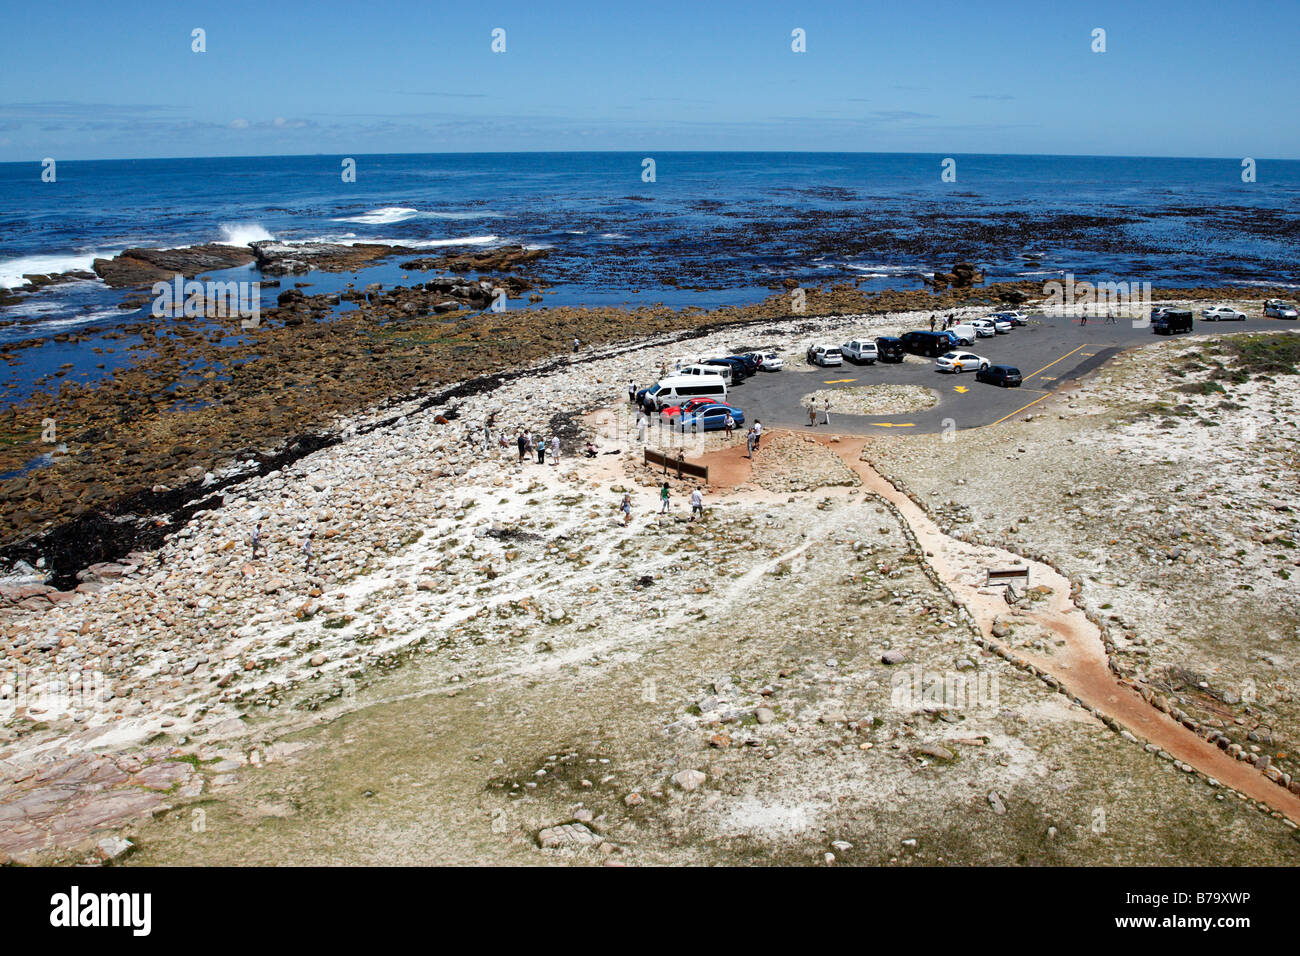 looking down on the car park and tourists at the cape of good hope south africa Stock Photo